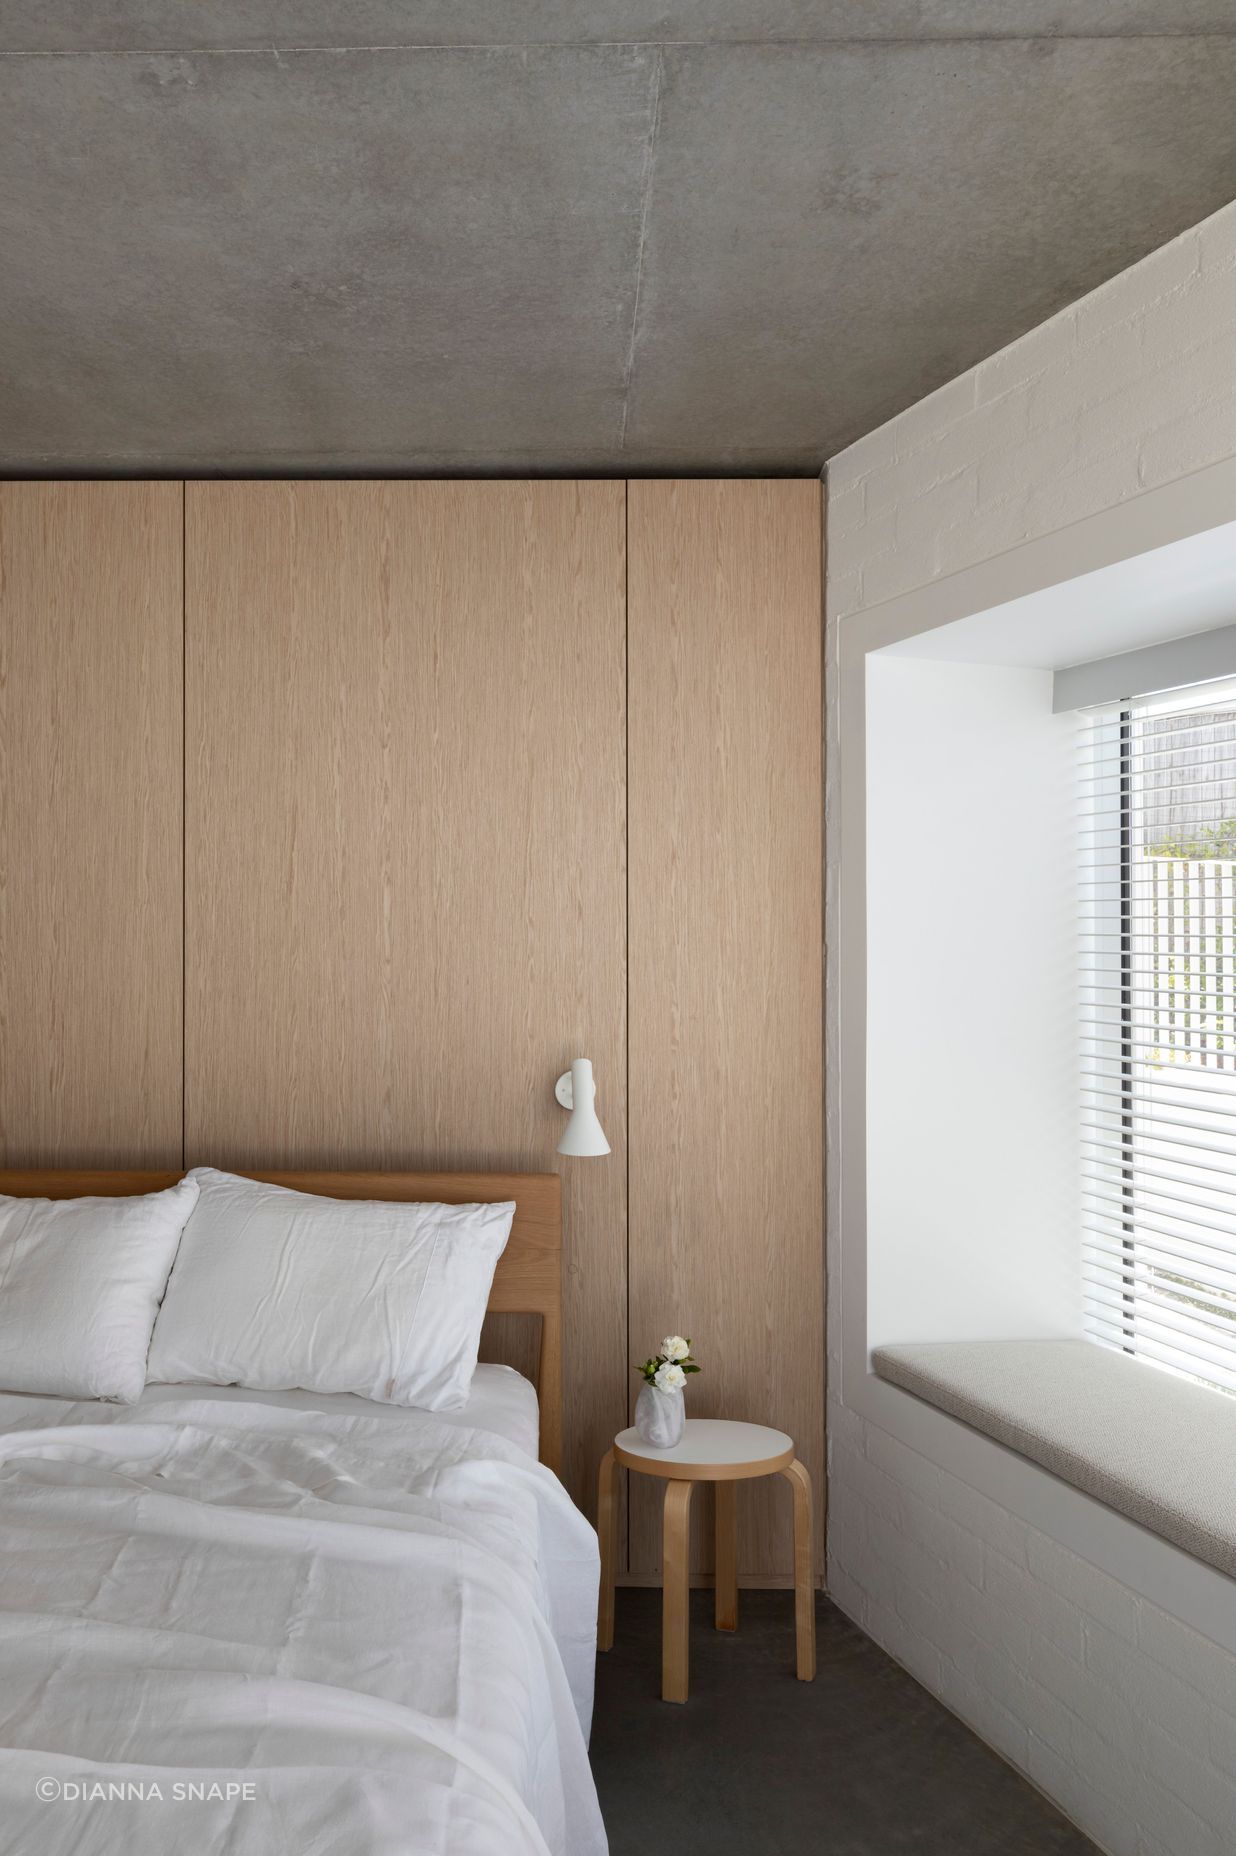 Simplicity of materiality creates a restful bedroom space with timber, concrete and white bagged brick.